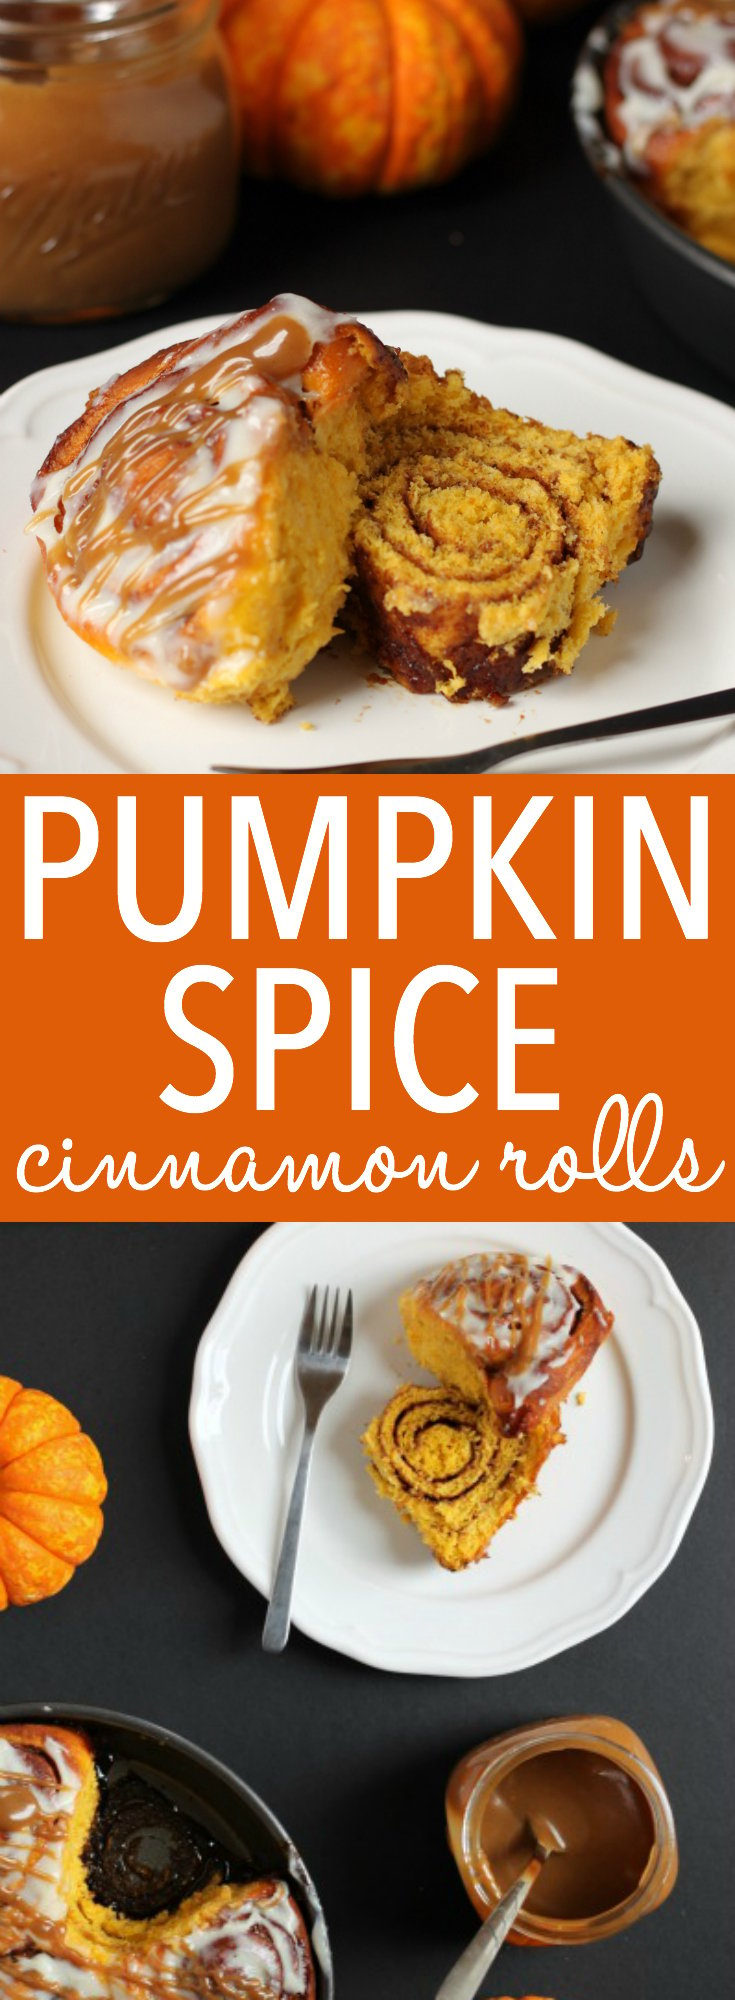 These soft and moist Pumpkin Spice Cinnamon Rolls are the perfect fall treat made with real pumpkin, fragrant spices and an easy cream cheese glaze! Recipe from thebusybaker.ca! #PumpkinSpice via @busybakerblog